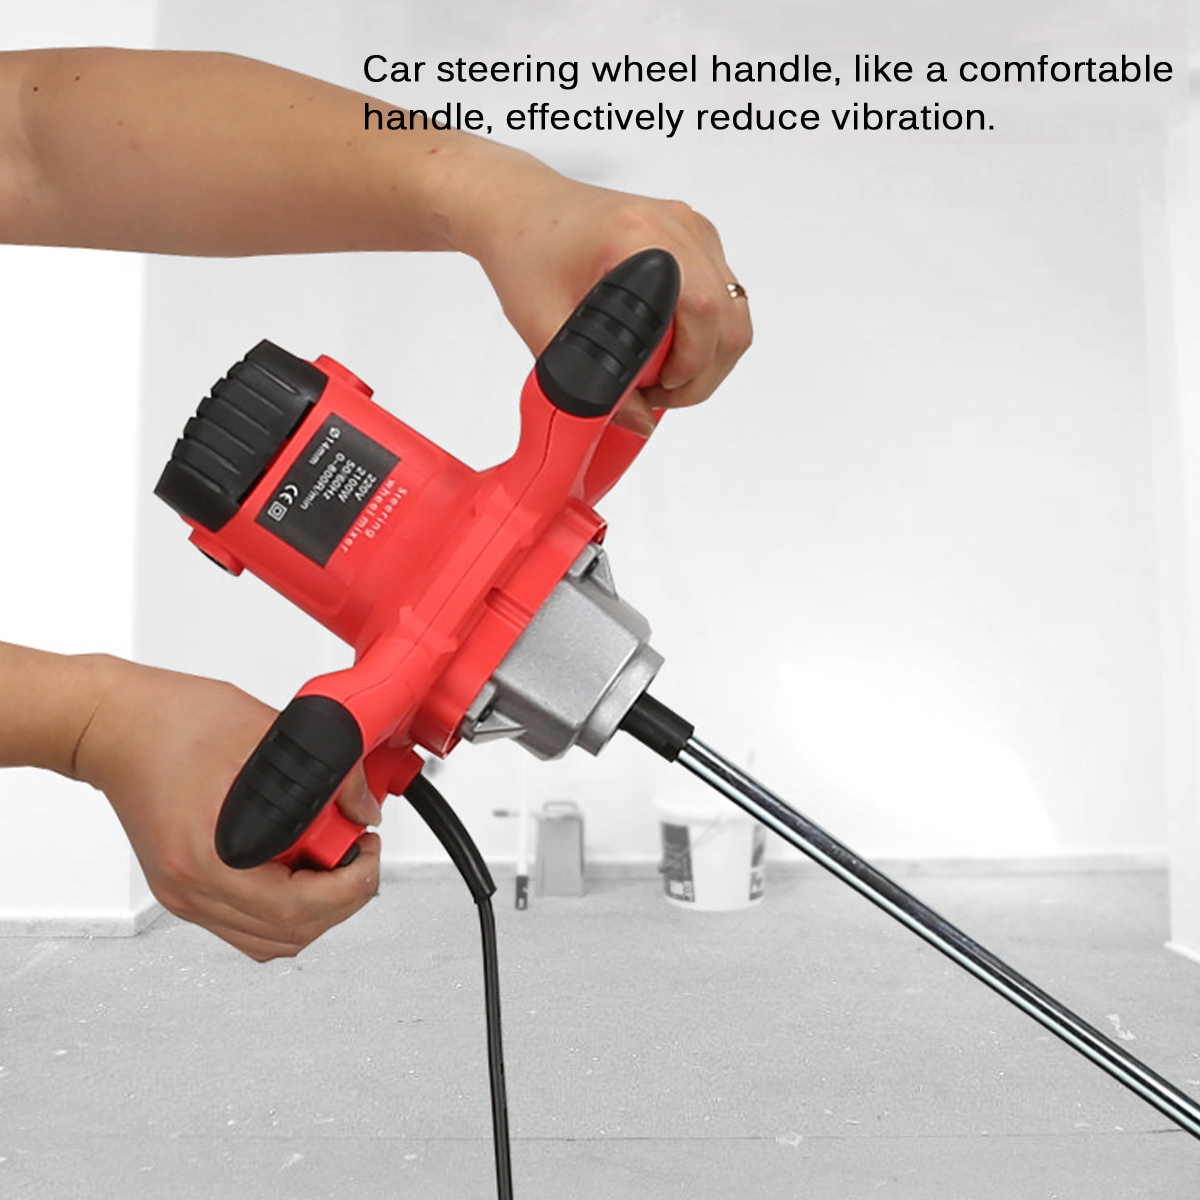 Cement-Mixer-Concrete-Grout-Painting-Hand-Power-Mixer-6-Speed-1697783-6